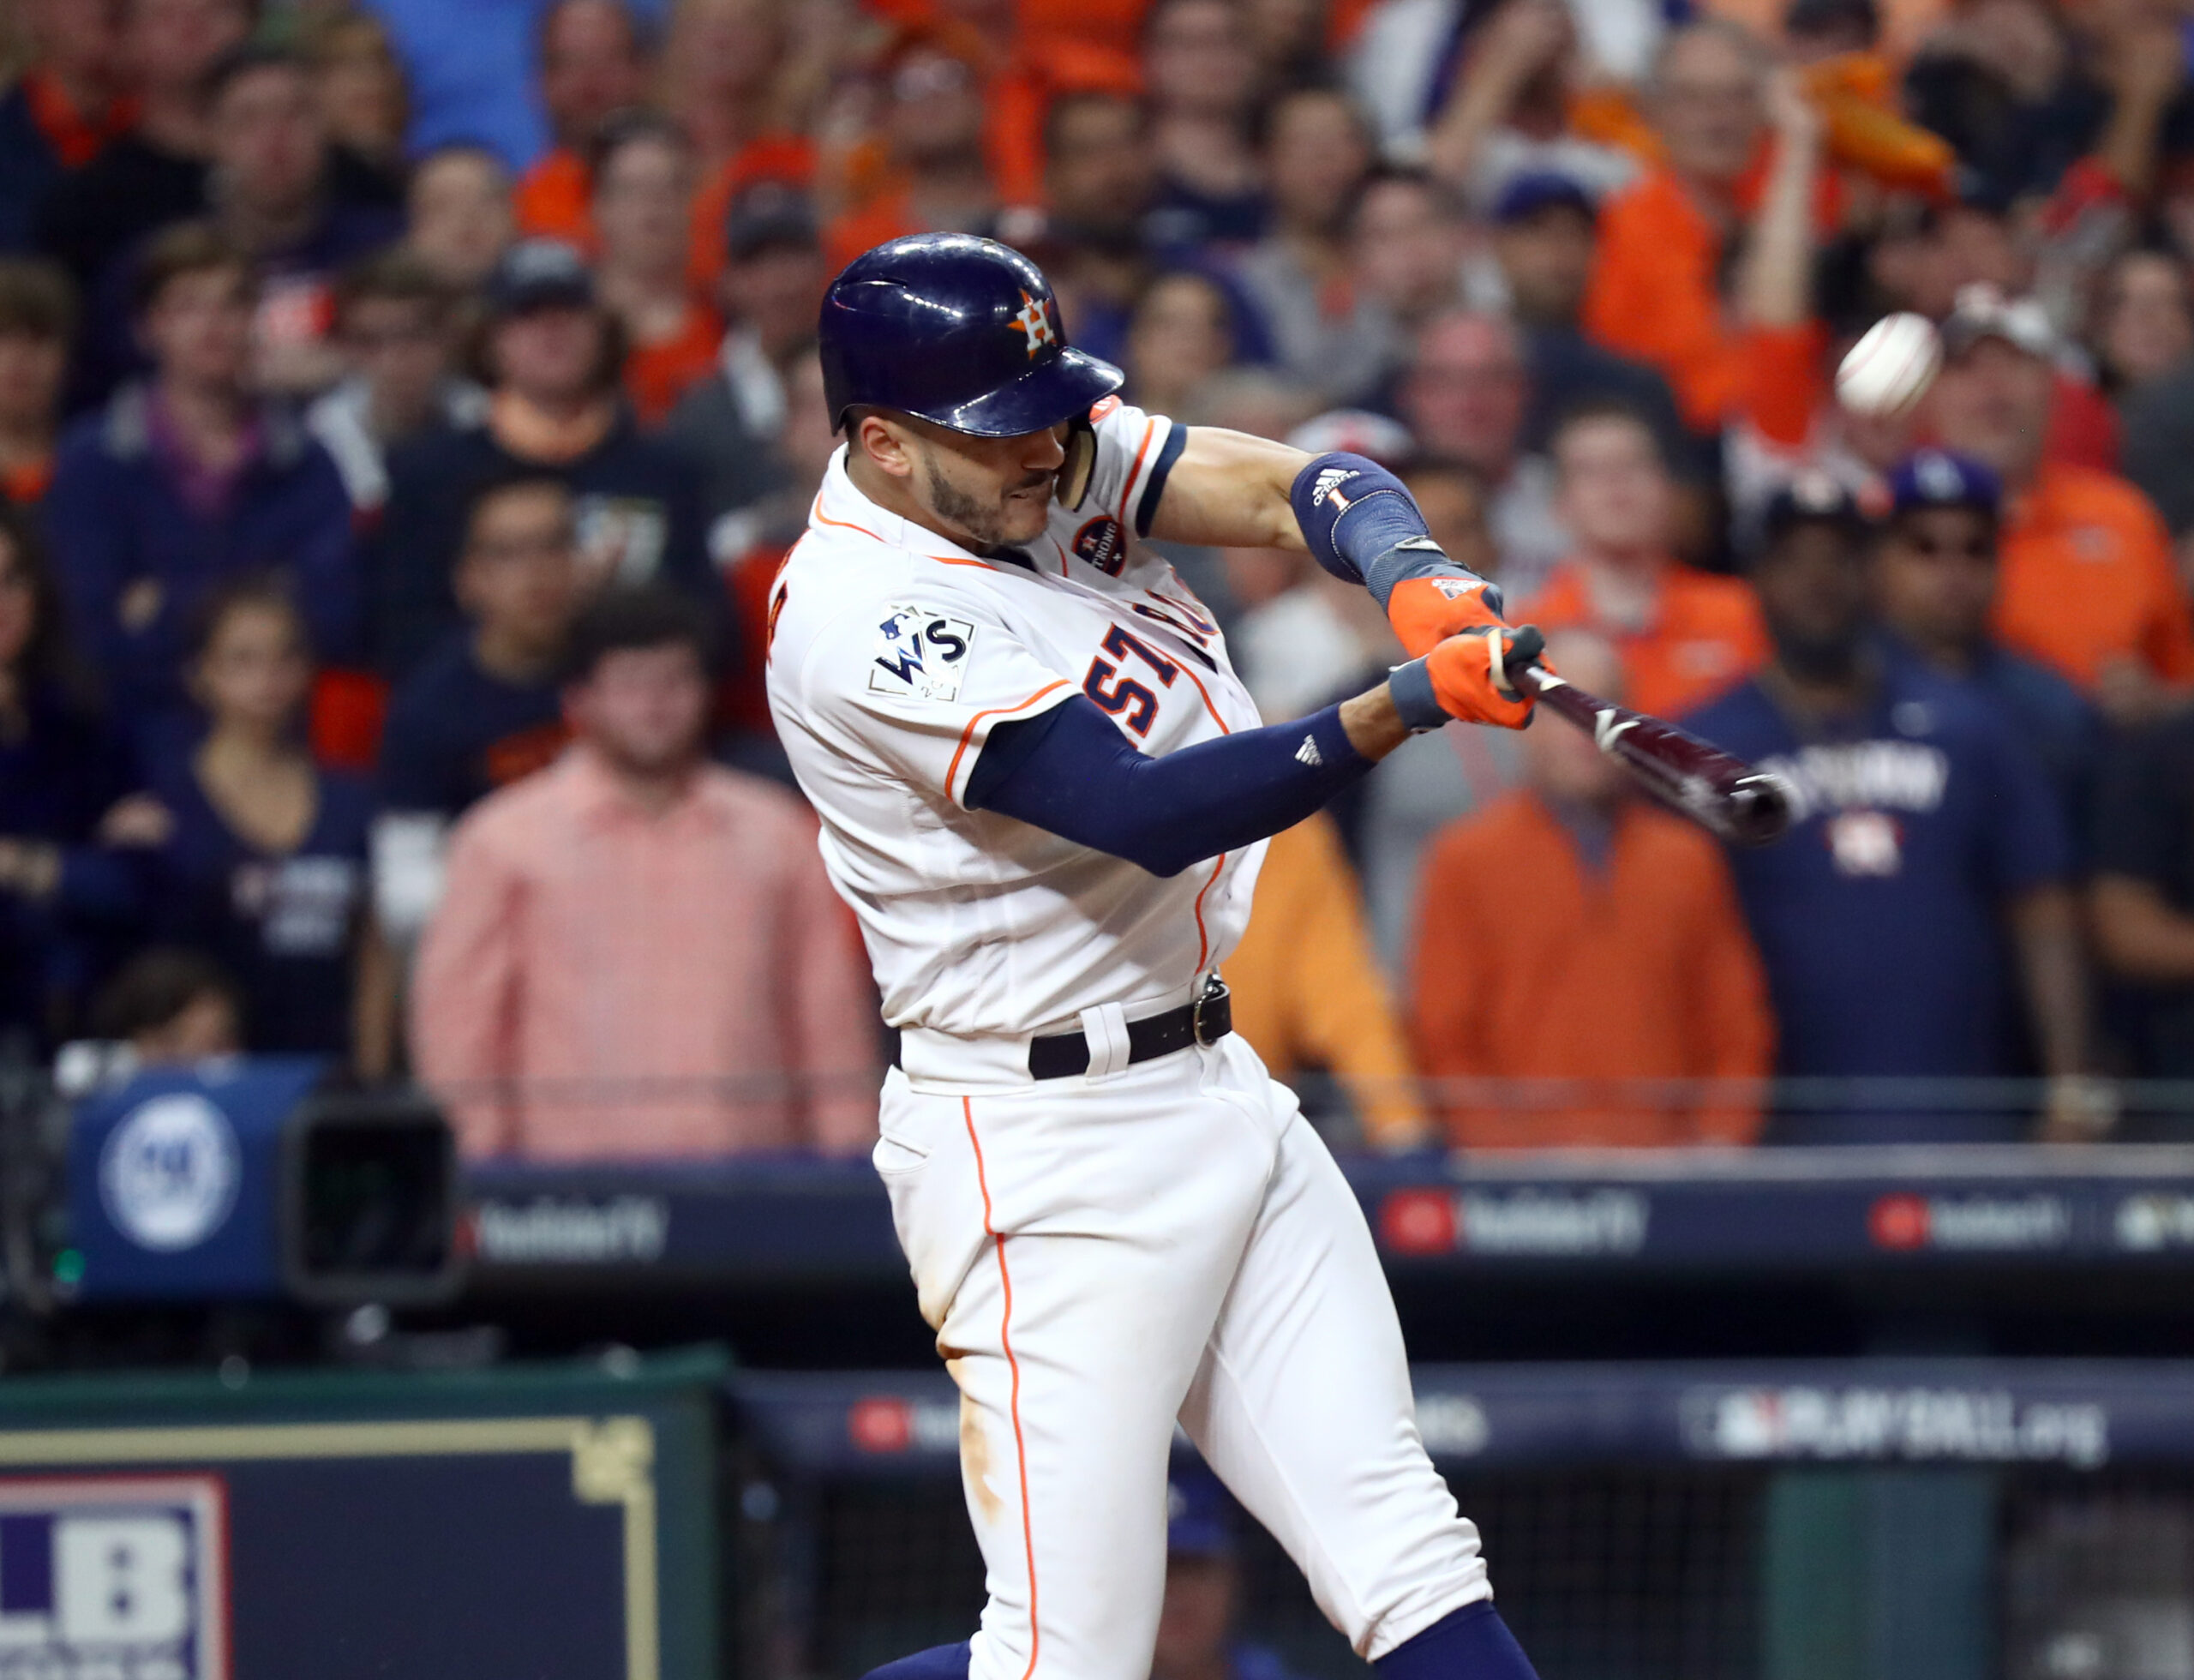 Carlos Correa of the Puerto Rico watches his two-run home run to